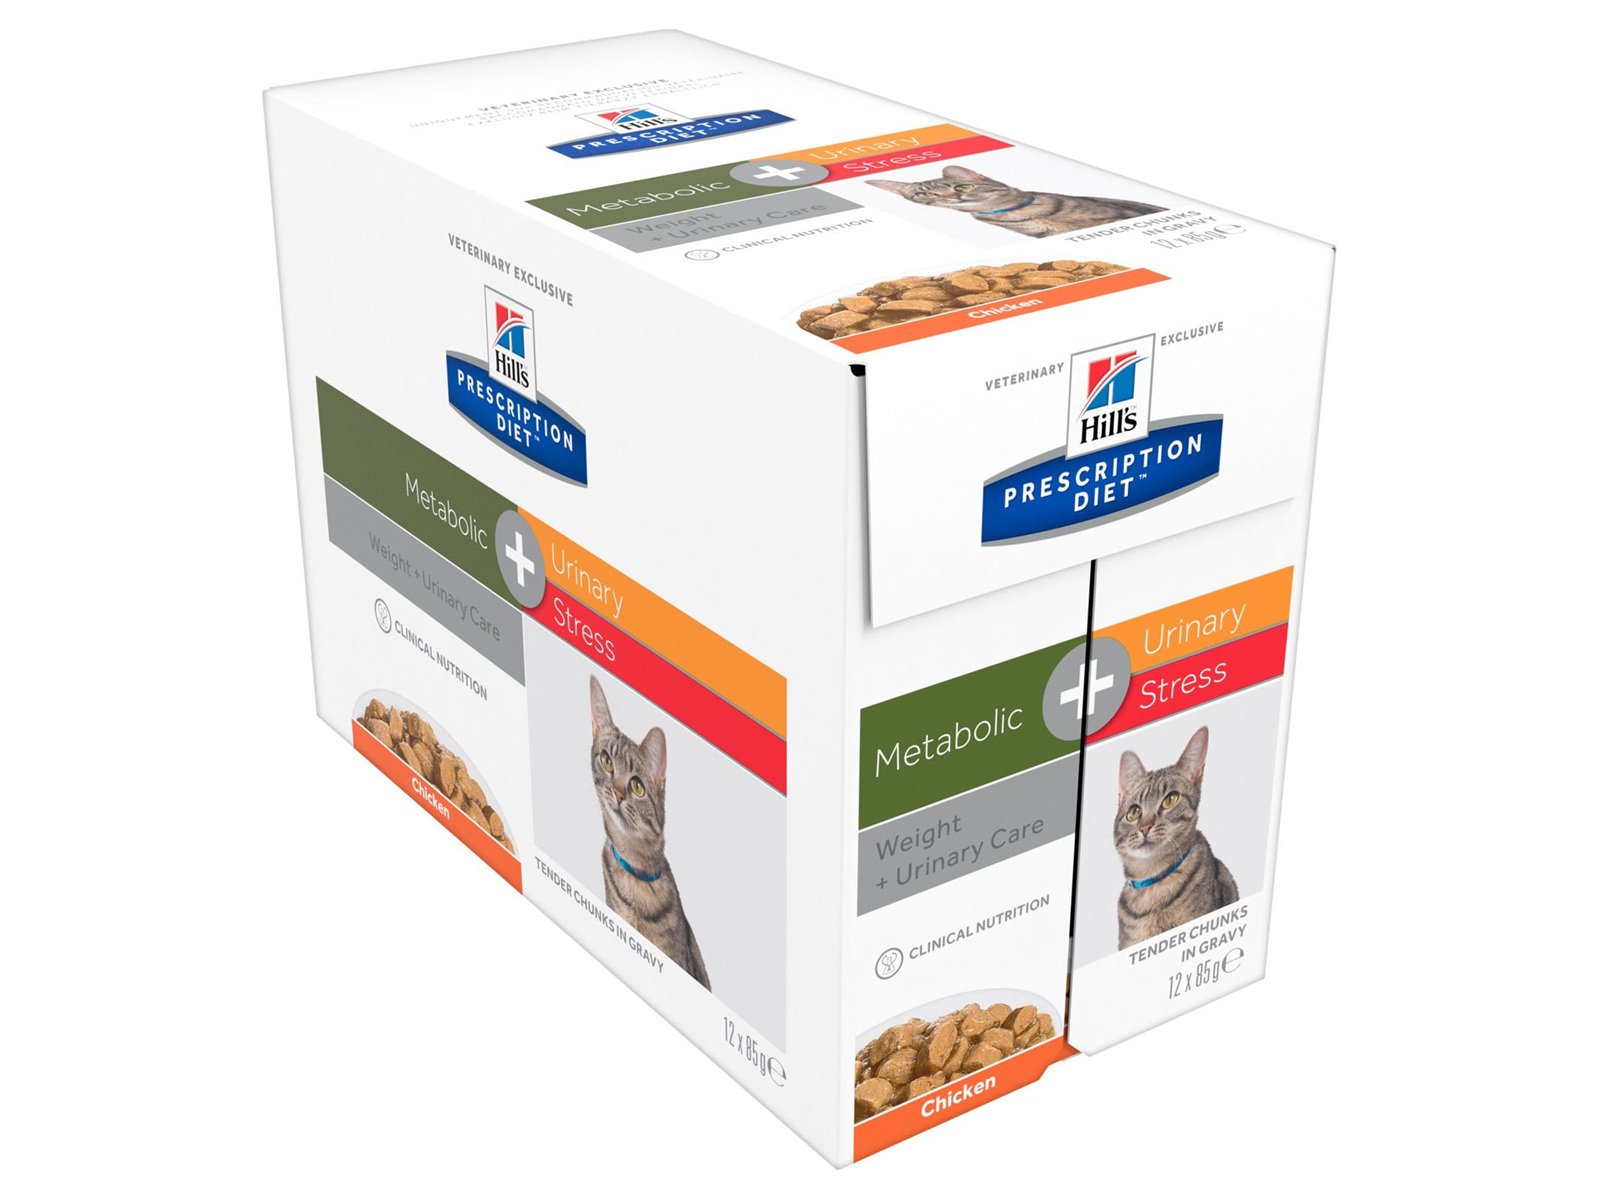 Hill's Prescription Diet Metabolic + Urinary Stress Cat Food Pouches